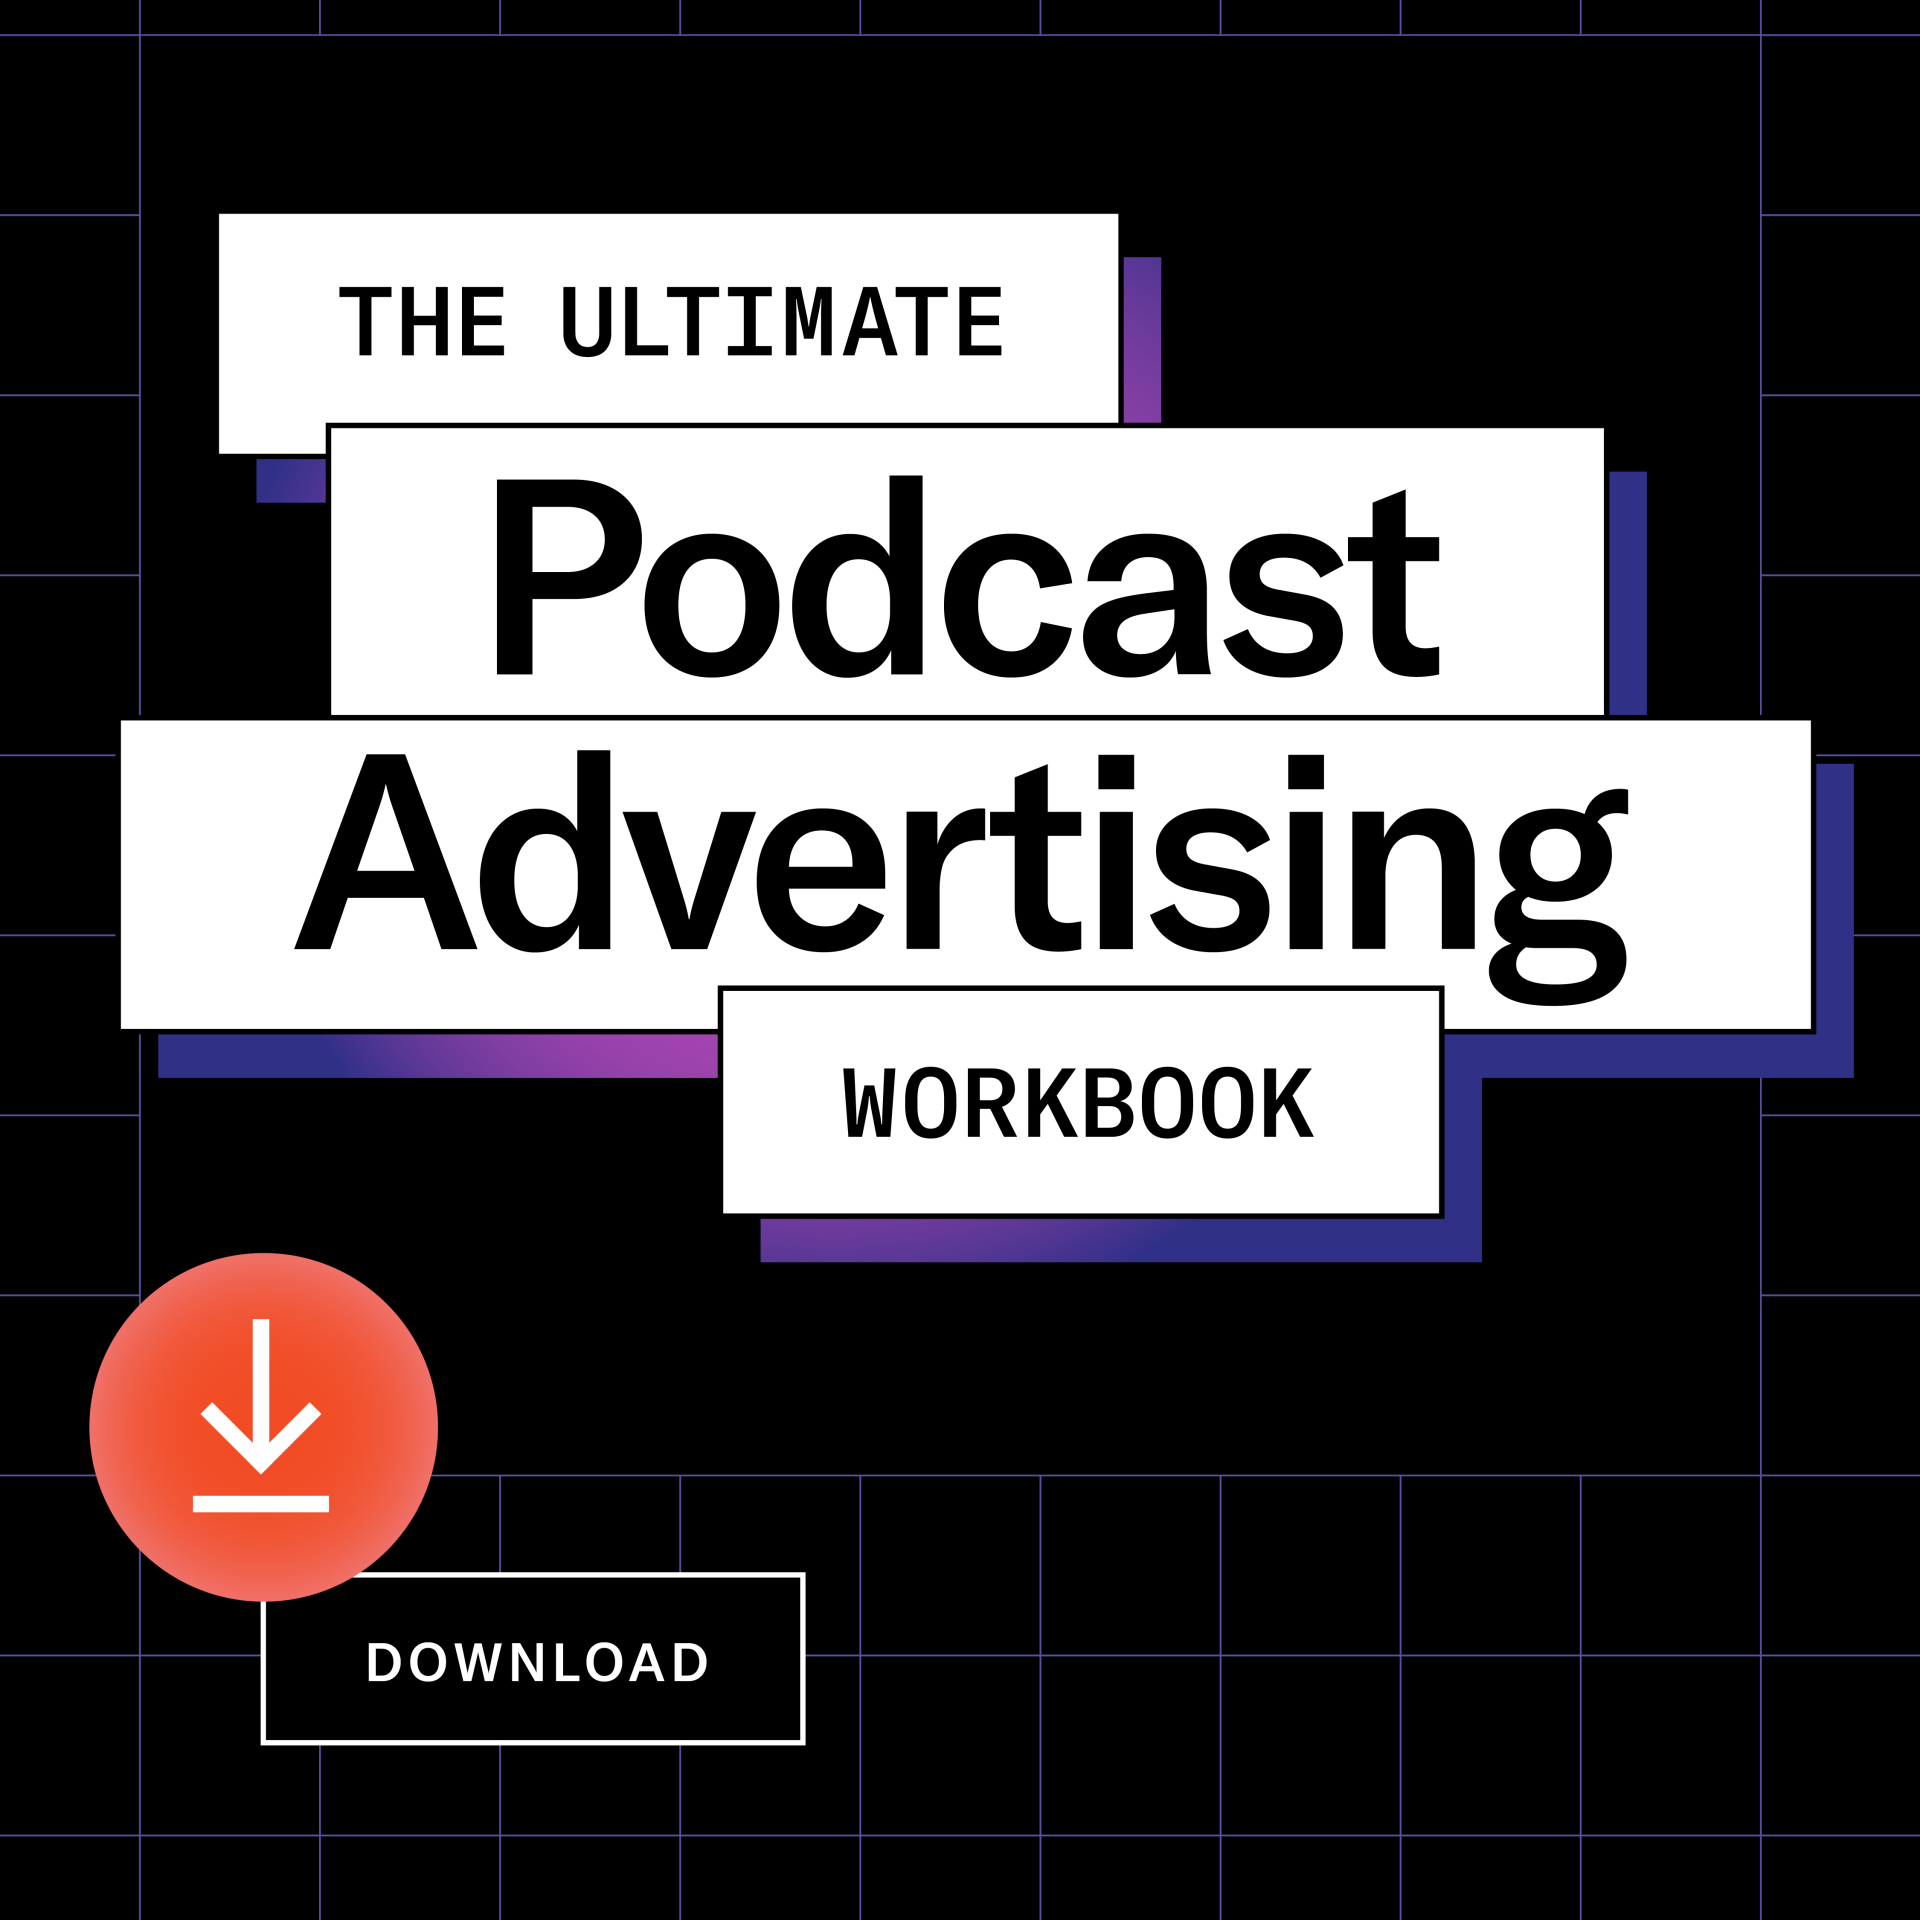 The Ultimate Podcast Advertising Workbook